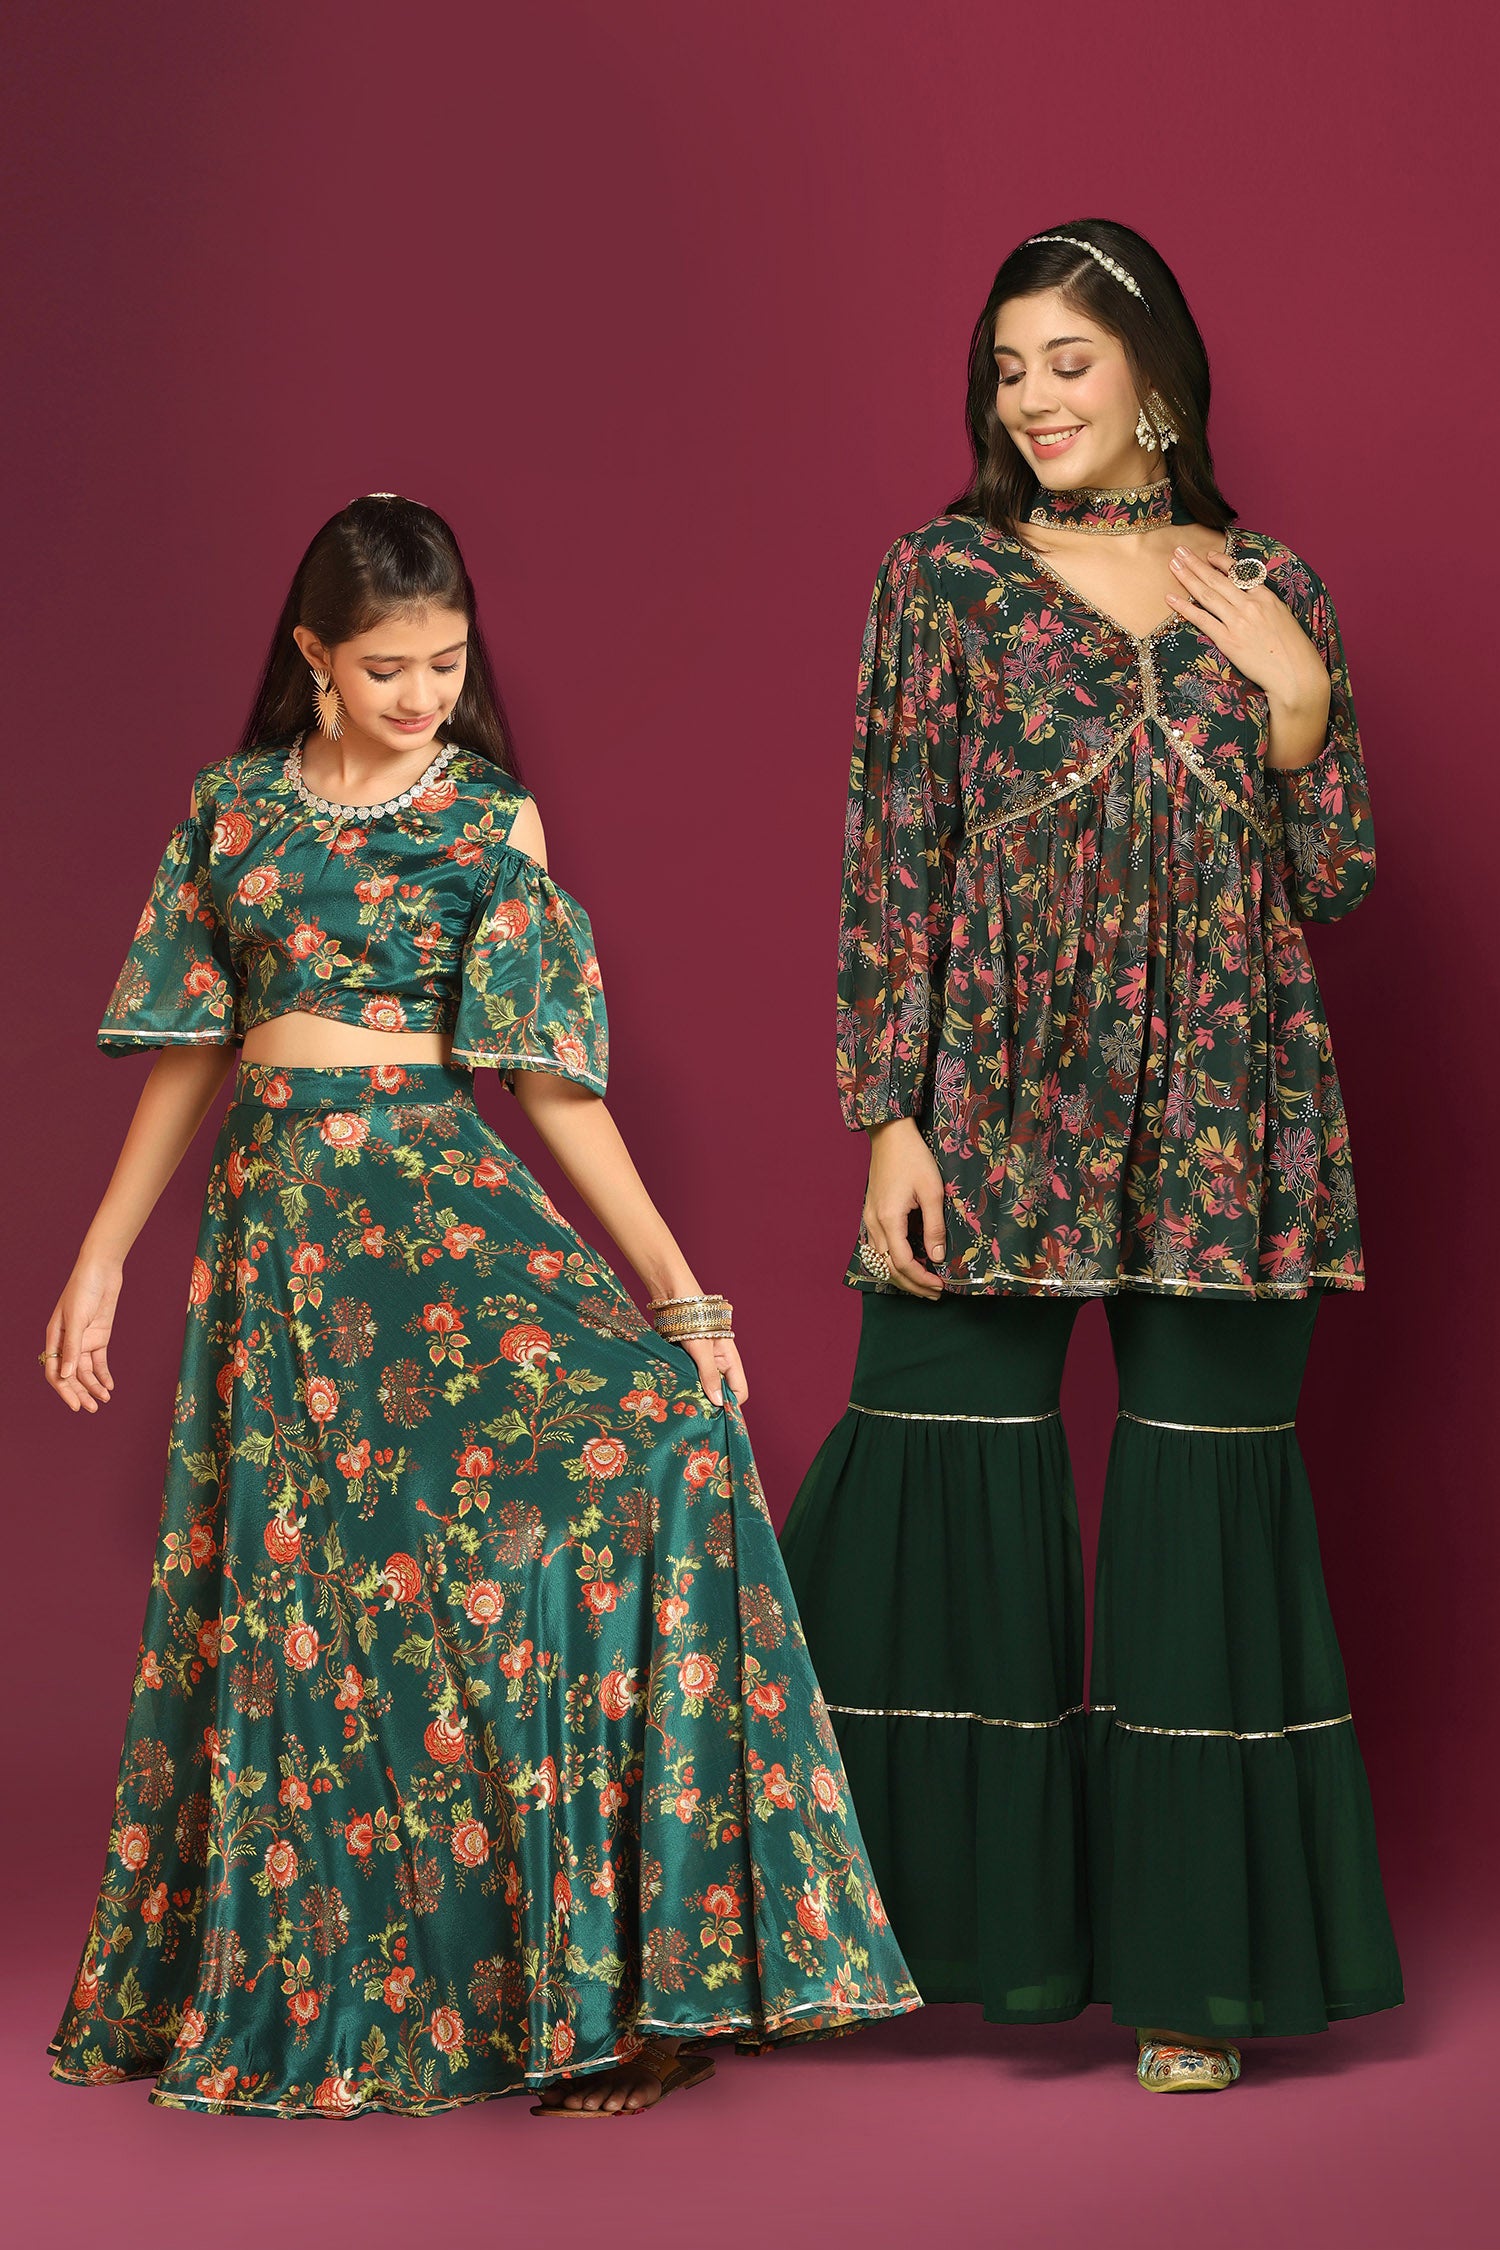 Mother Daughter Matching Outfits For Parties and Weddings